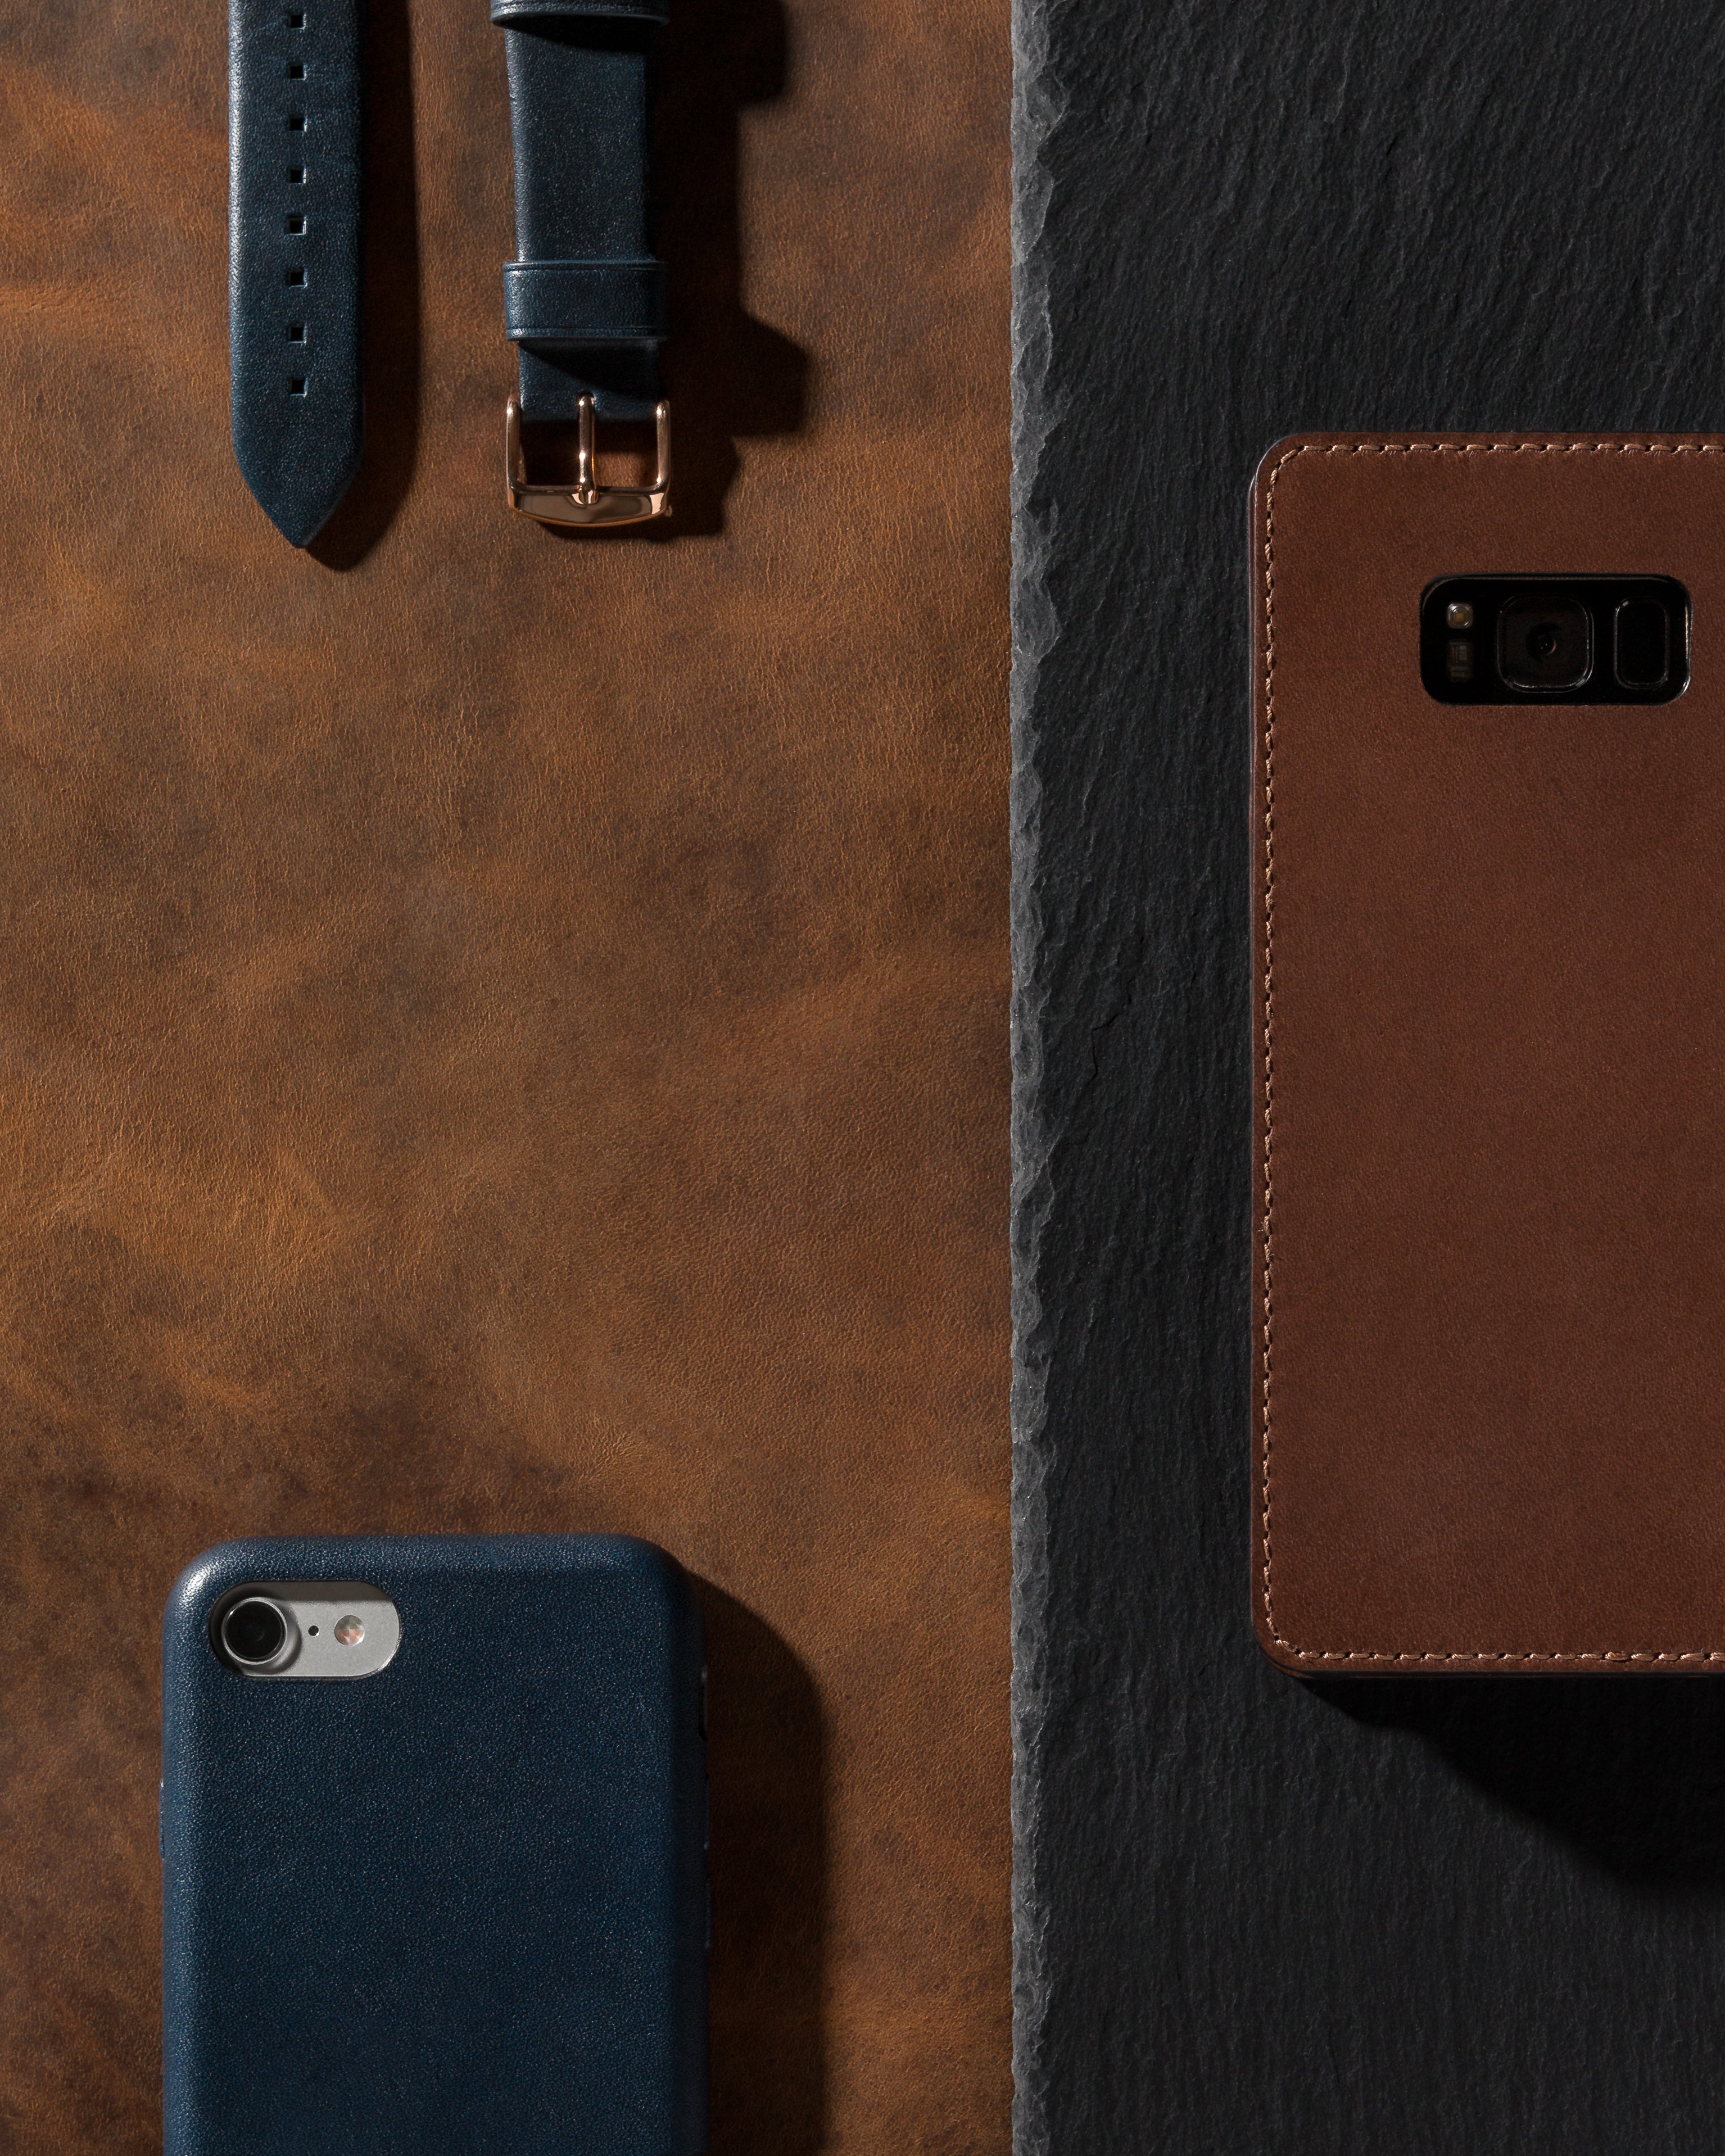 Iphone 11 Pro Bumper Taigarama - Men - Small Leather Goods